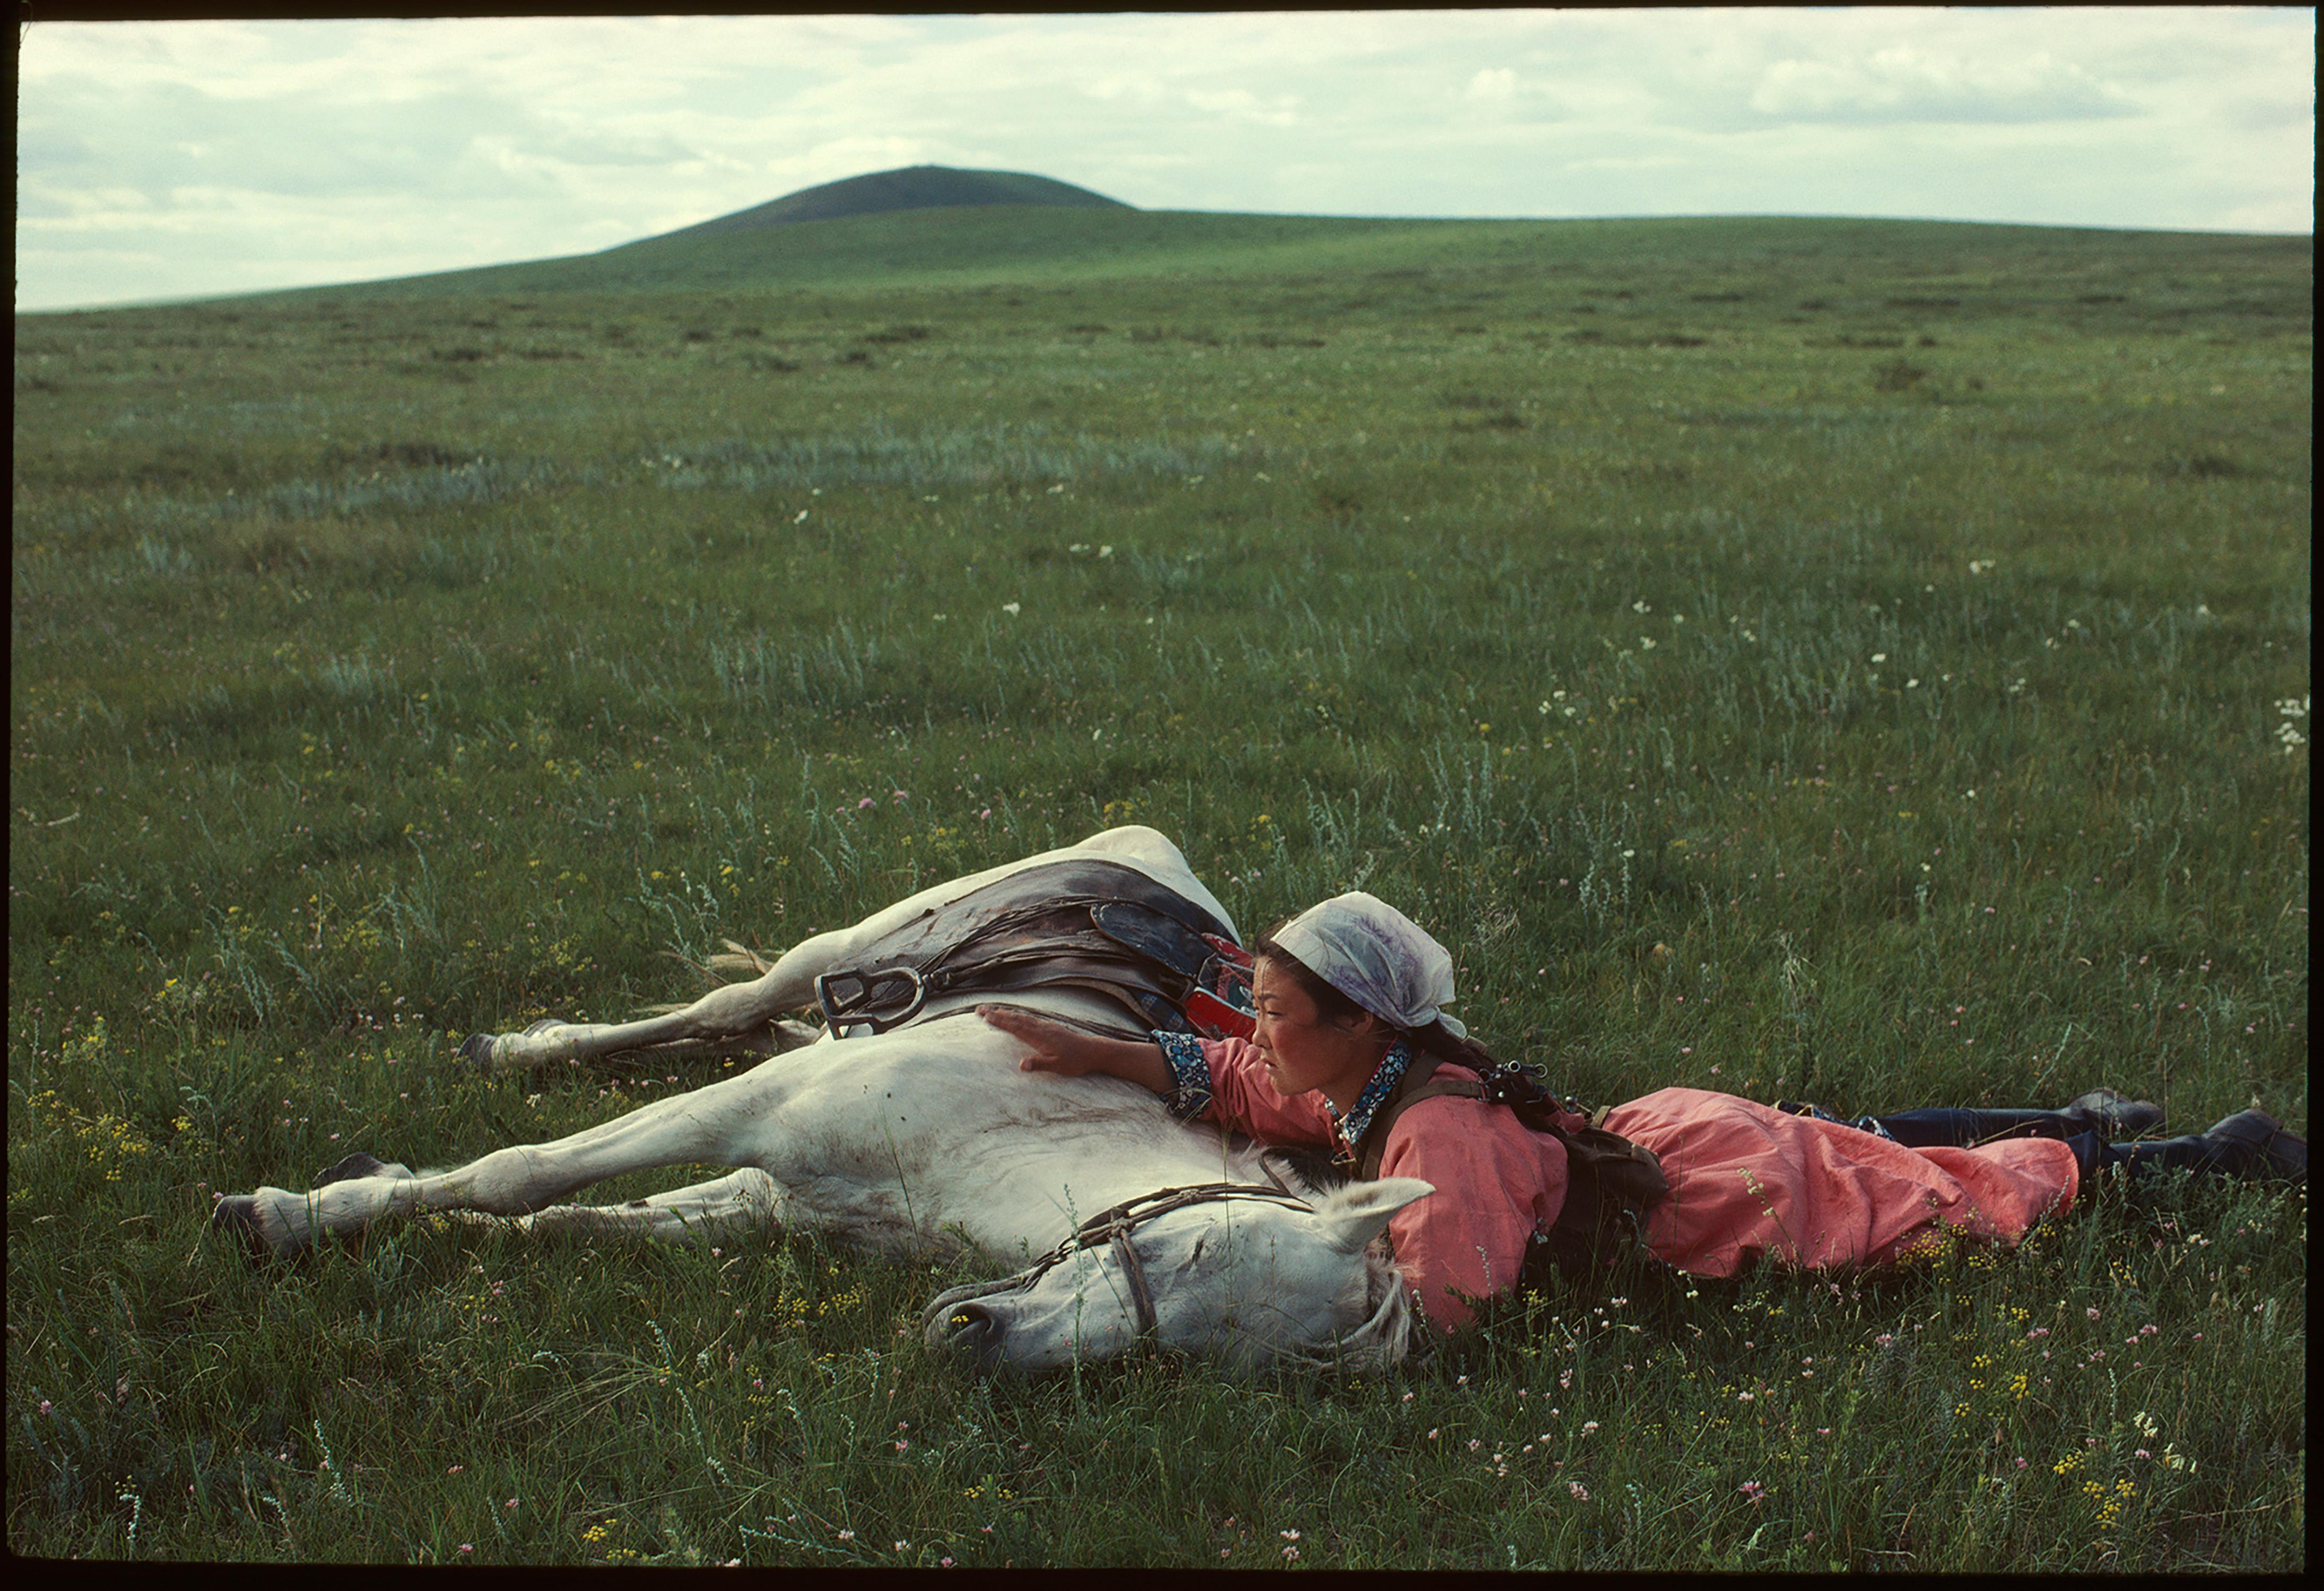 A woman trains a horse for the militia in Inner Mongolia, China in 1979.

All available sizes and editions:
20" x 24", Edition of 25 + 3 Artist Proofs
24" x 34", Edition of 25 + 3 Artist Proofs

"Eve Arnold, born in 1912 to Russian-immigrant parents